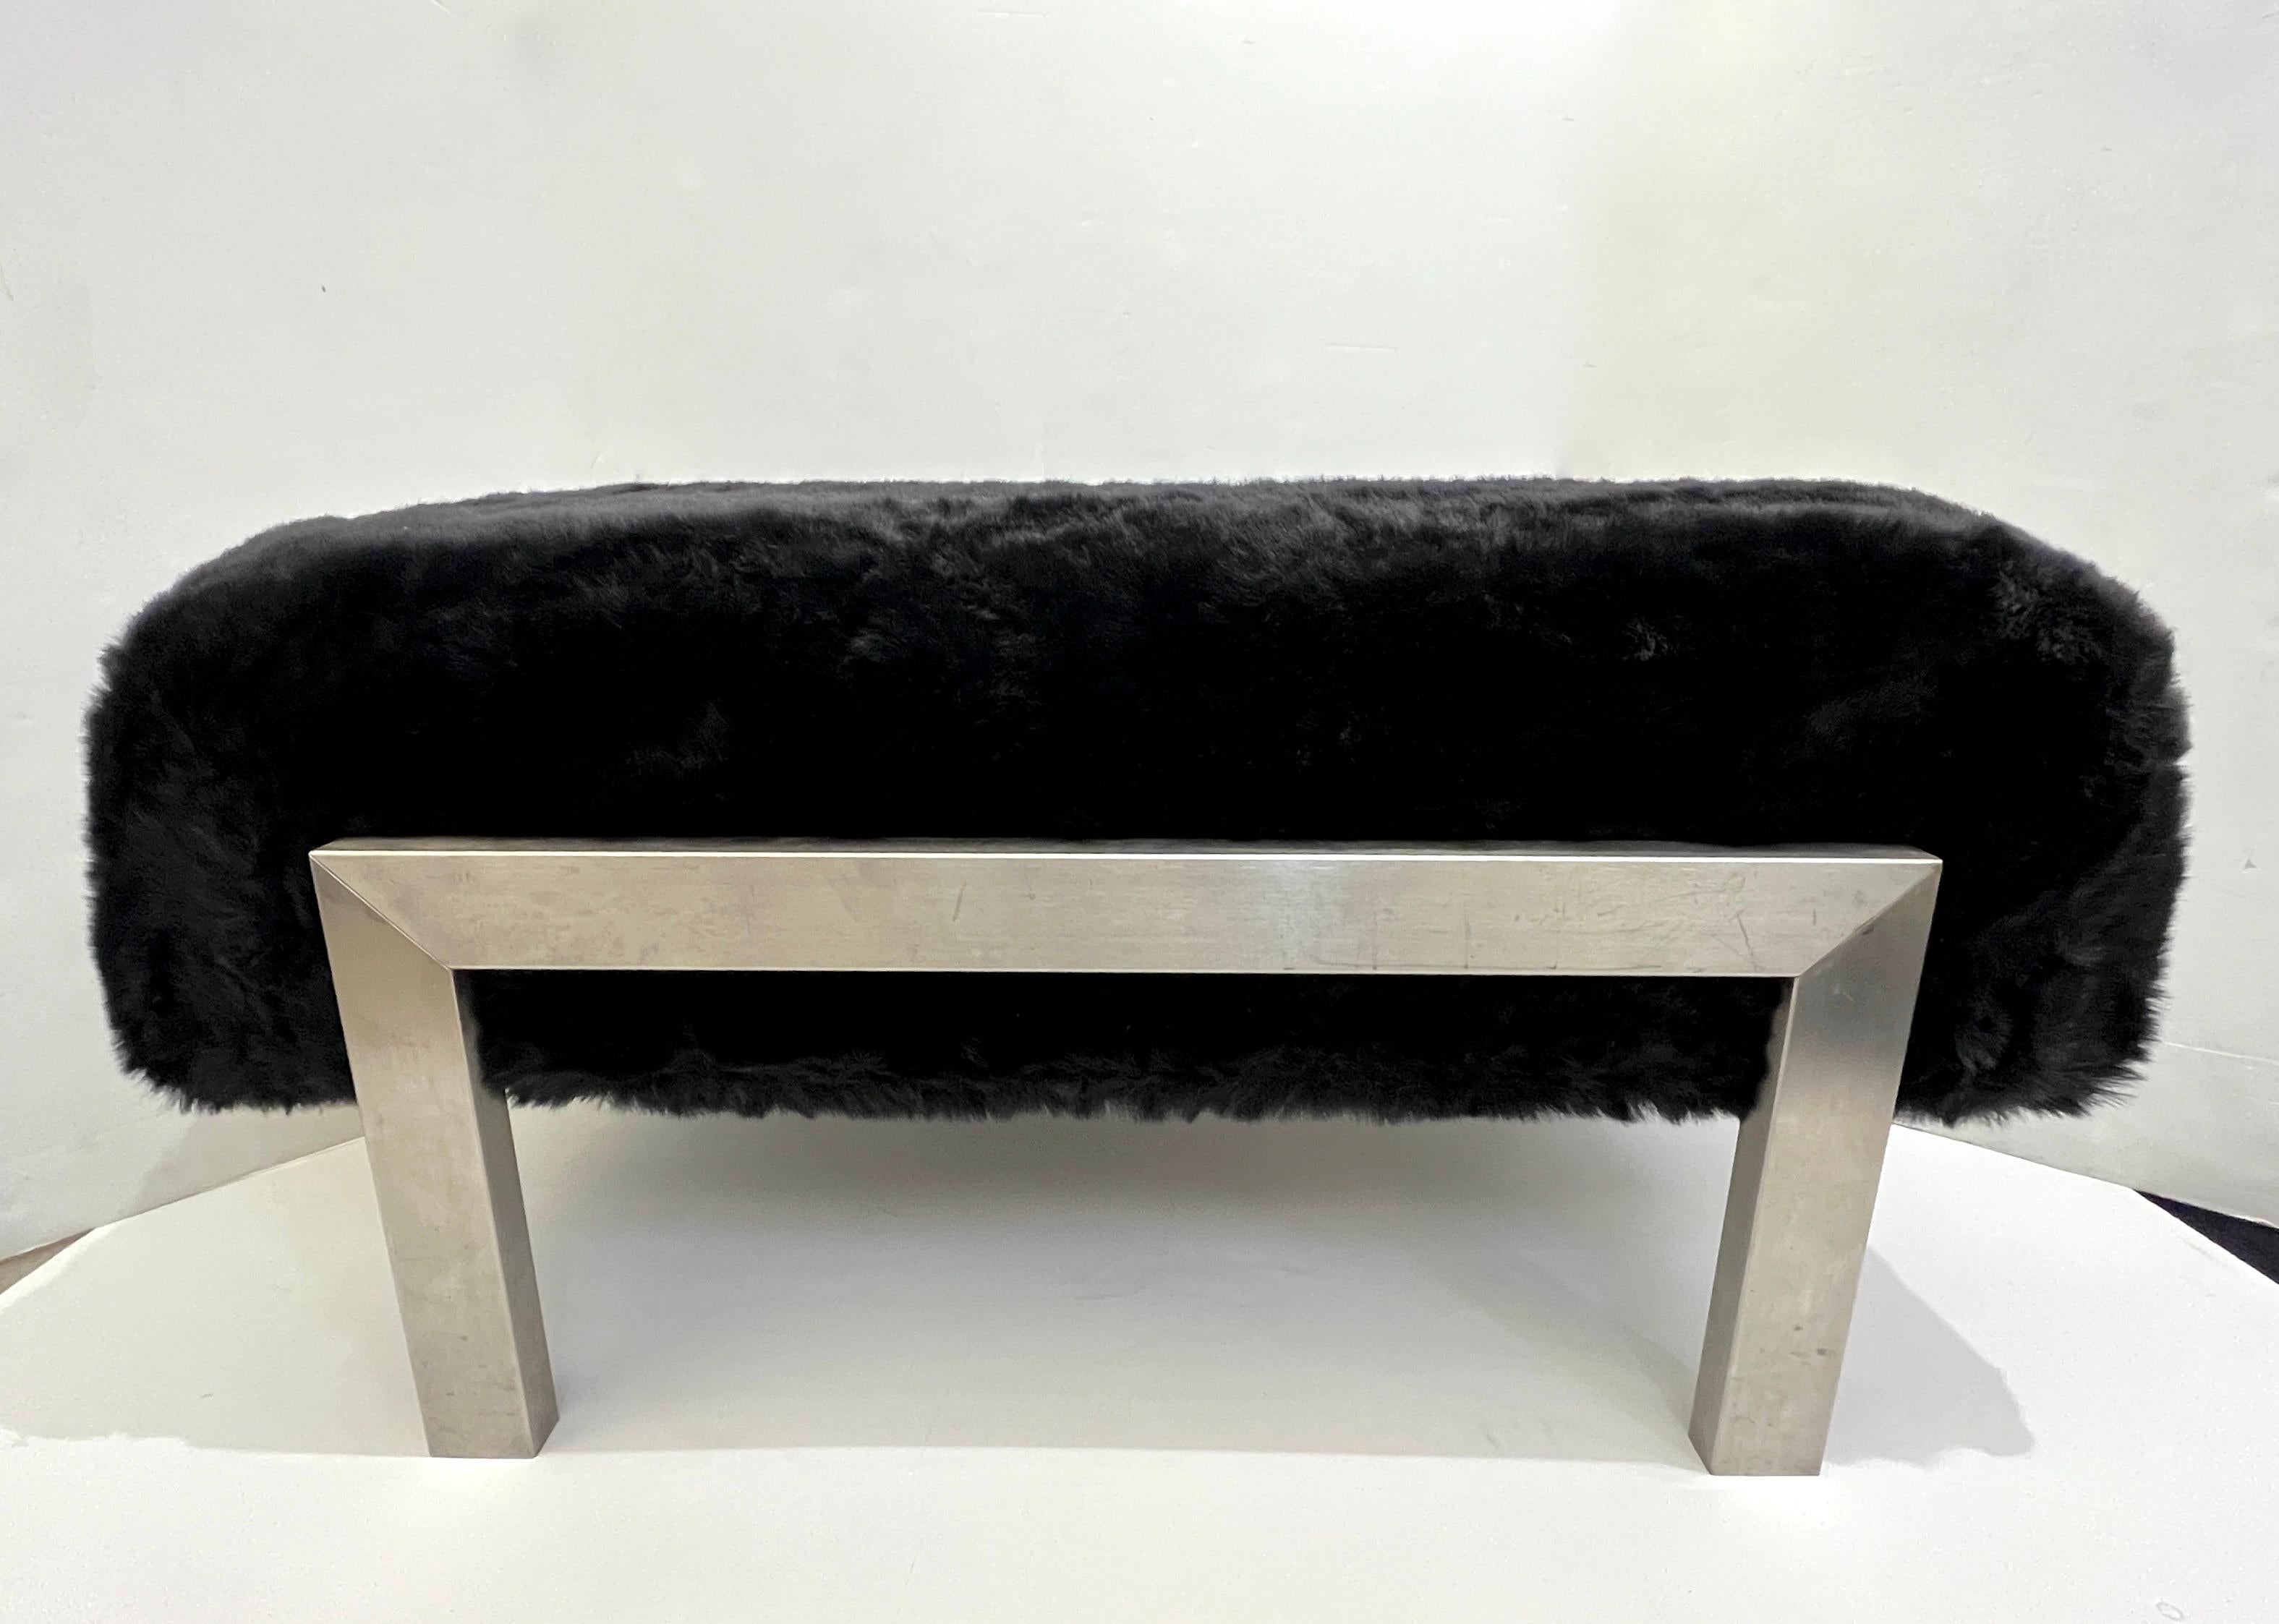 1970s Italian Vintage Black Faux Fur Steel Bed Stool Bench - 1 Pair available For Sale 6